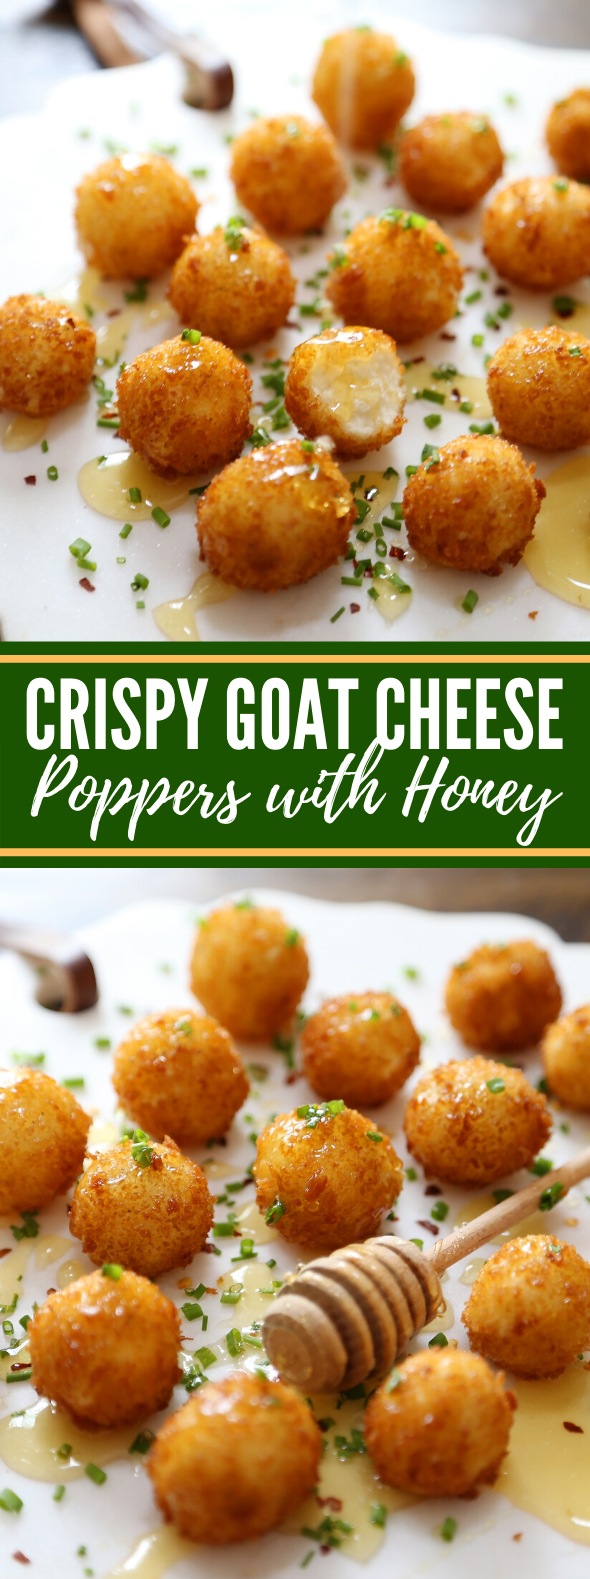 CRISPY GOAT CHEESE POPPERS WITH HONEY #appetizers #vegetarian